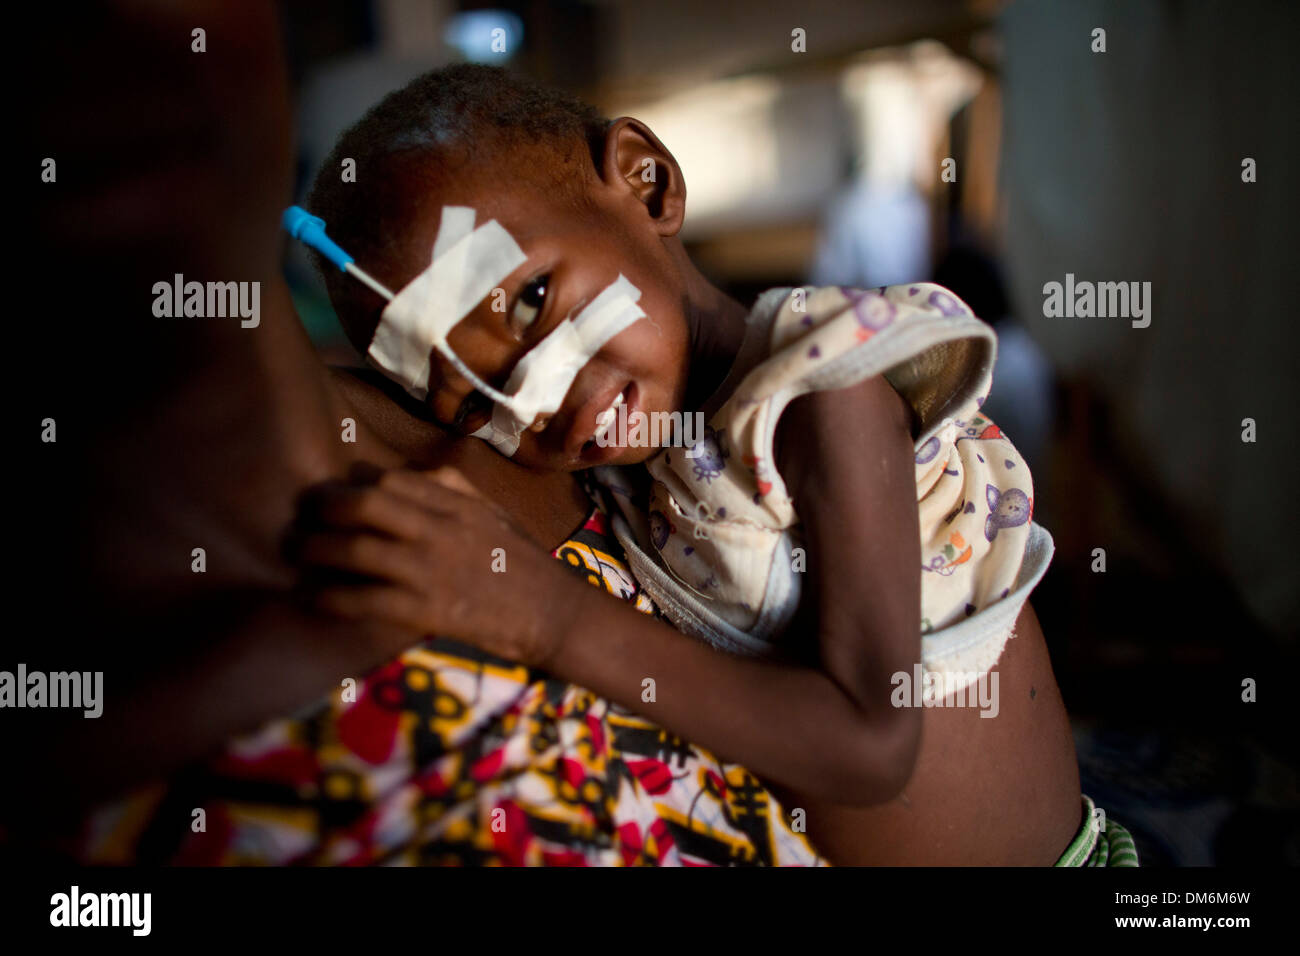 malnourished child at MSF hospital in central african republic Stock Photo